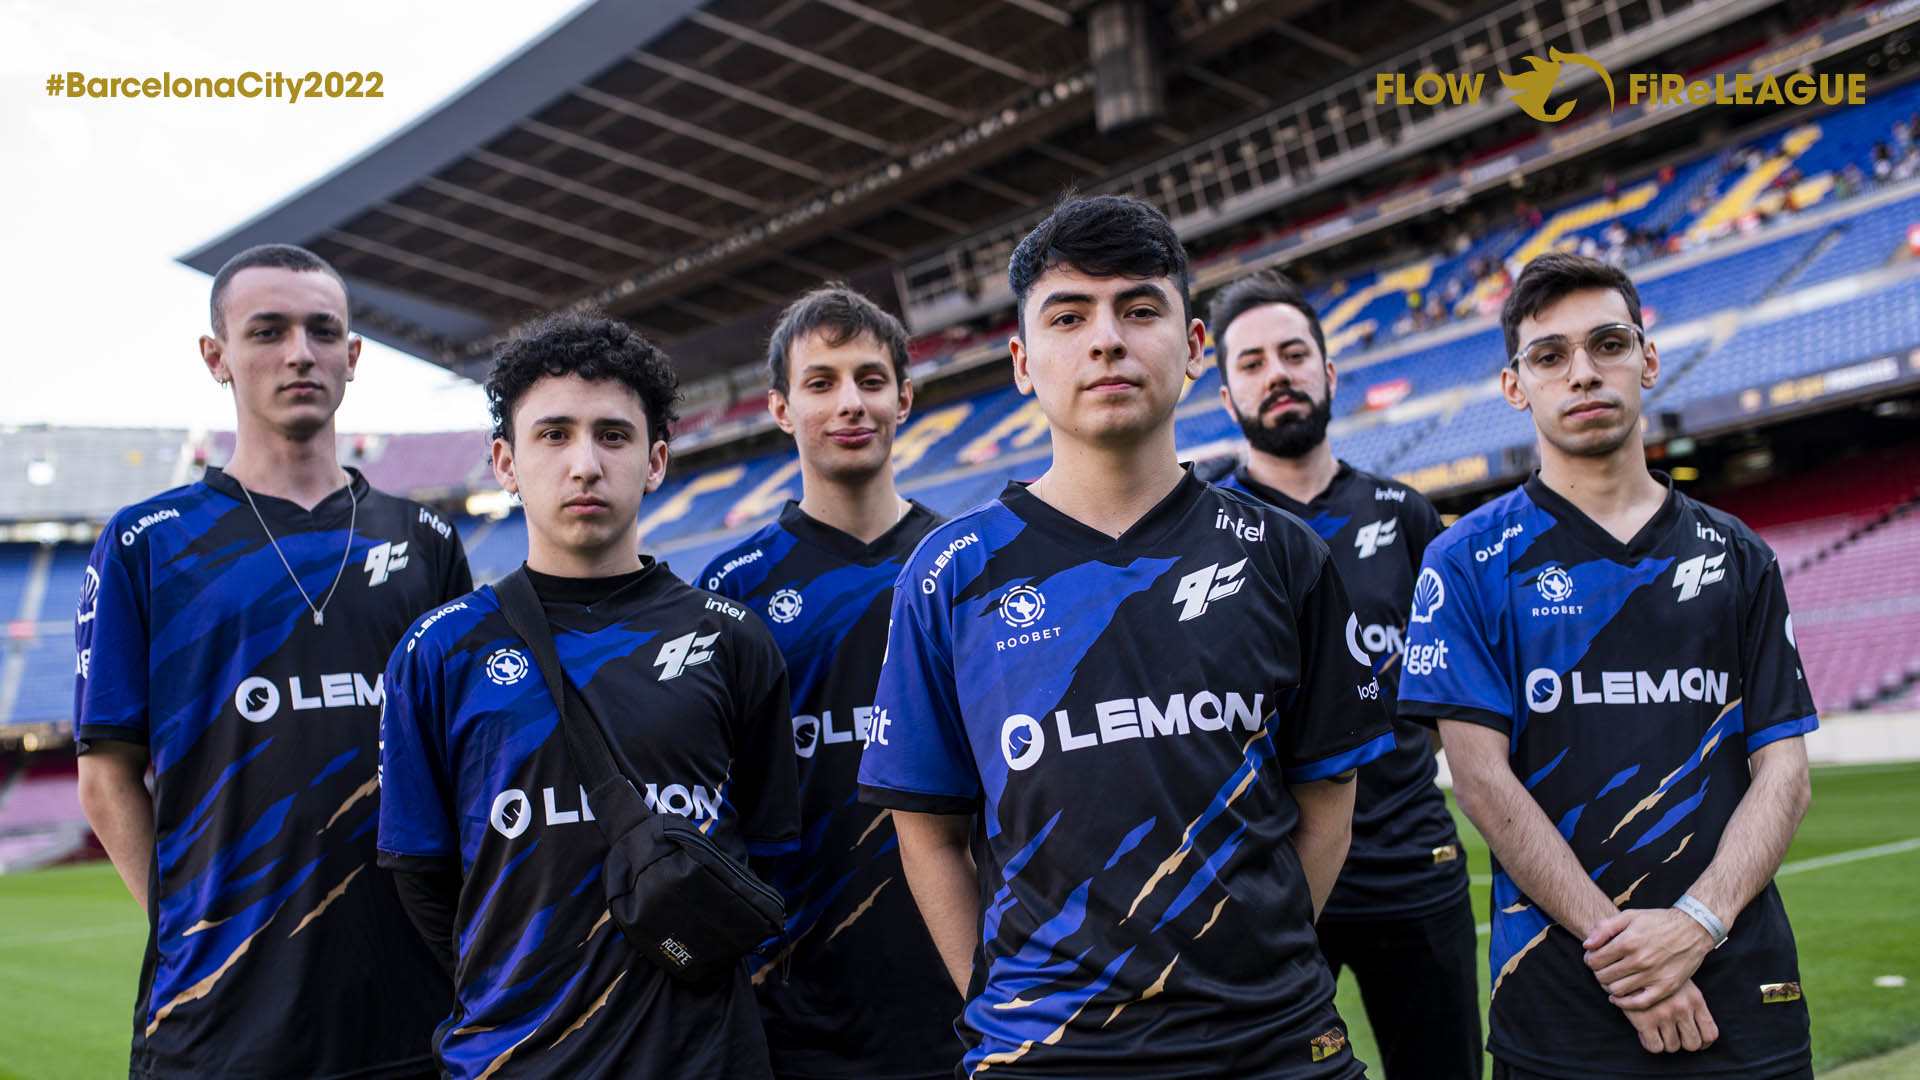 Flow FiReLEAGUE on "#FlowFiReLEAGUE | Global Finals LOS PRIMEROS LATINOS EN LLEGAR MAJOR, QUIERE HACER HISTORIA. THE FIRST LATAM TEAM TO REACH THE 9z WANTS TO MAKE HISTORY.